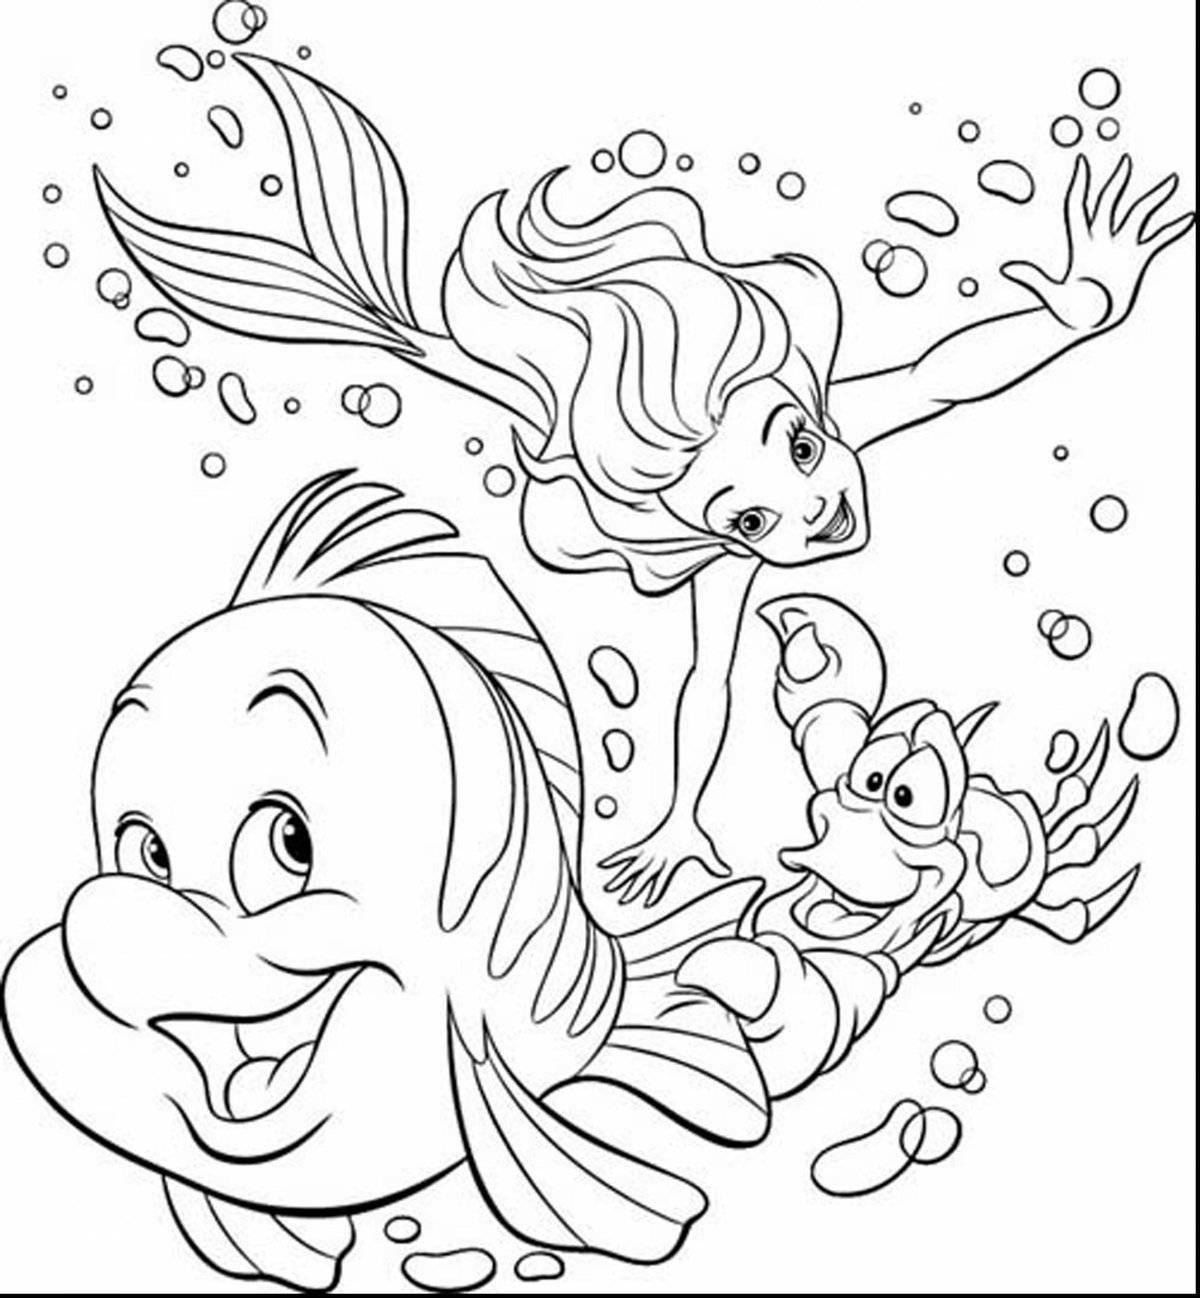 Pretty coloring page русалочка ариэль